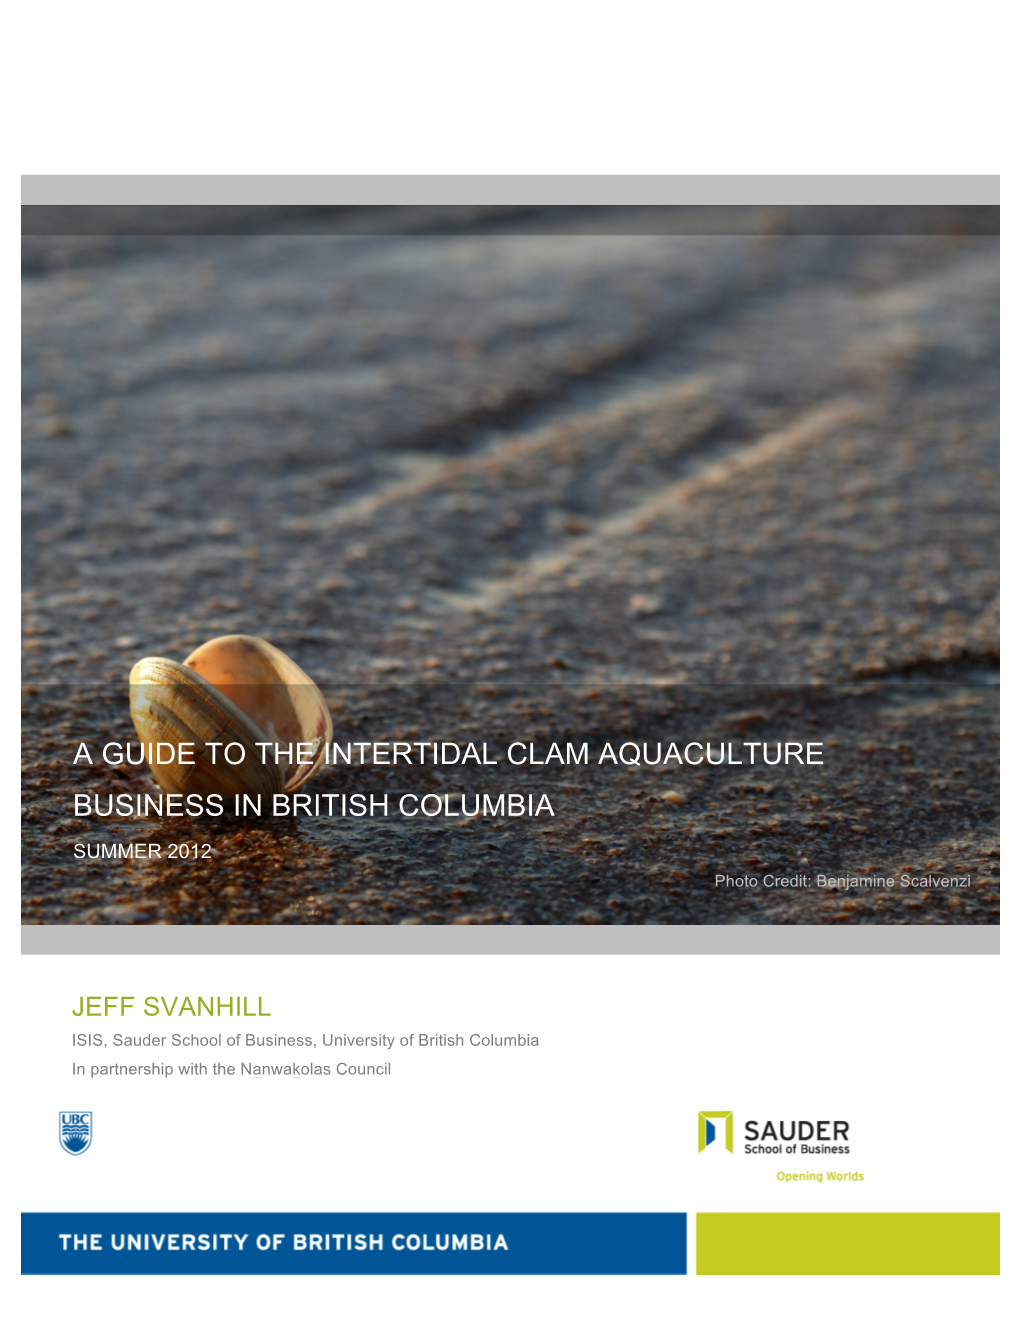 A Guide to Intertidal Clam Aquaculture Business in BC.Pdf